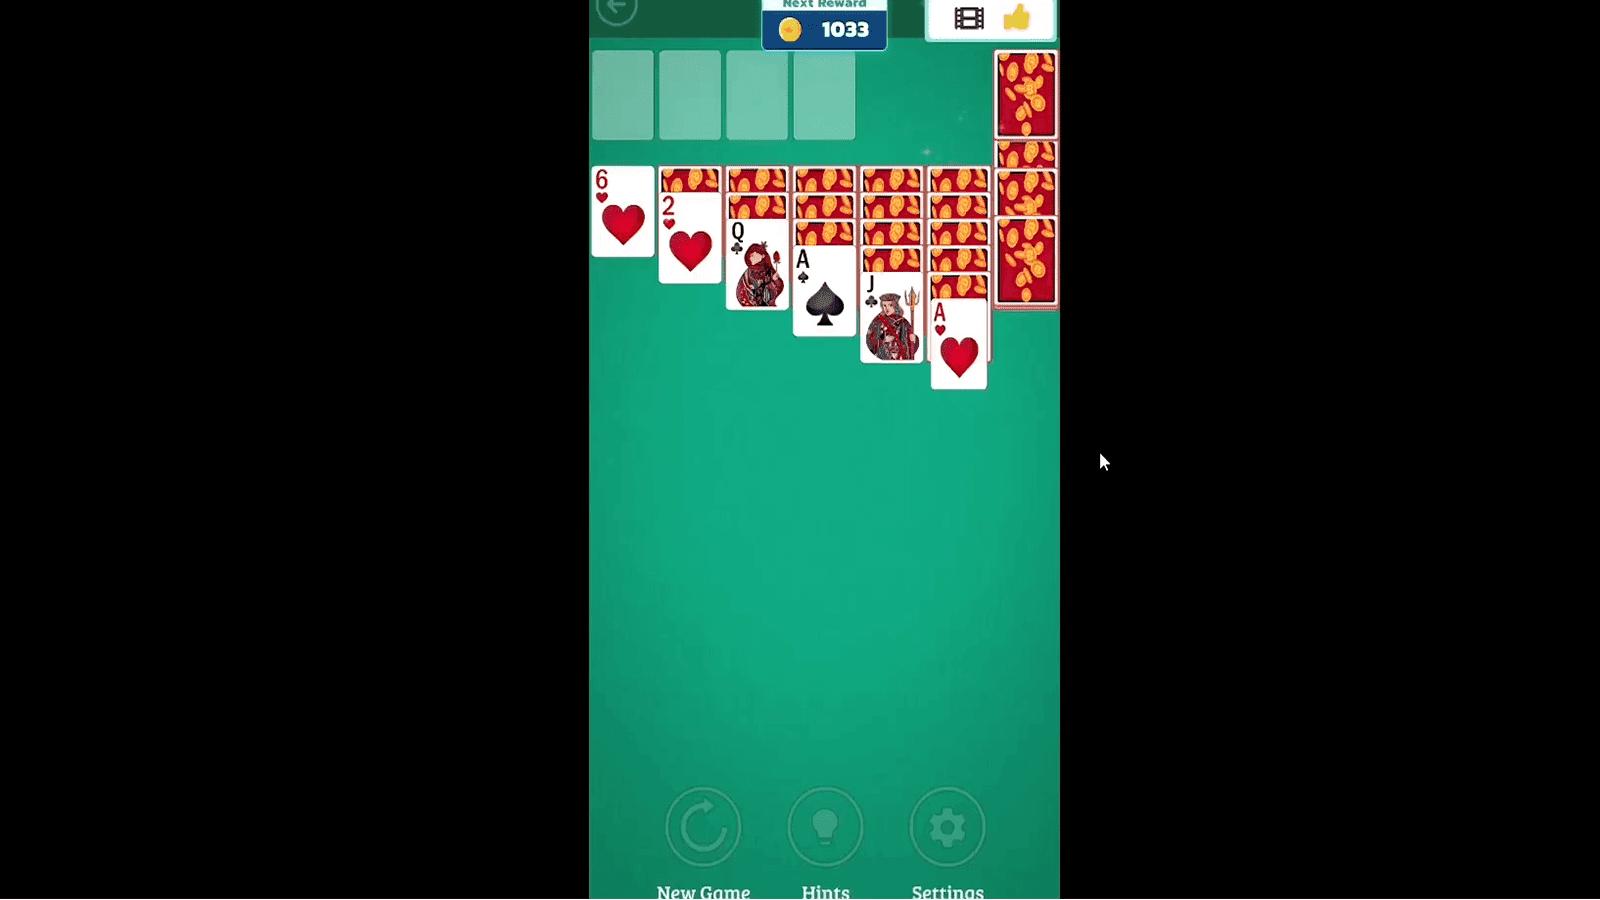 Solitaire Cube Review: A Legit Money-Making App or Just a Fun Mobile Game?